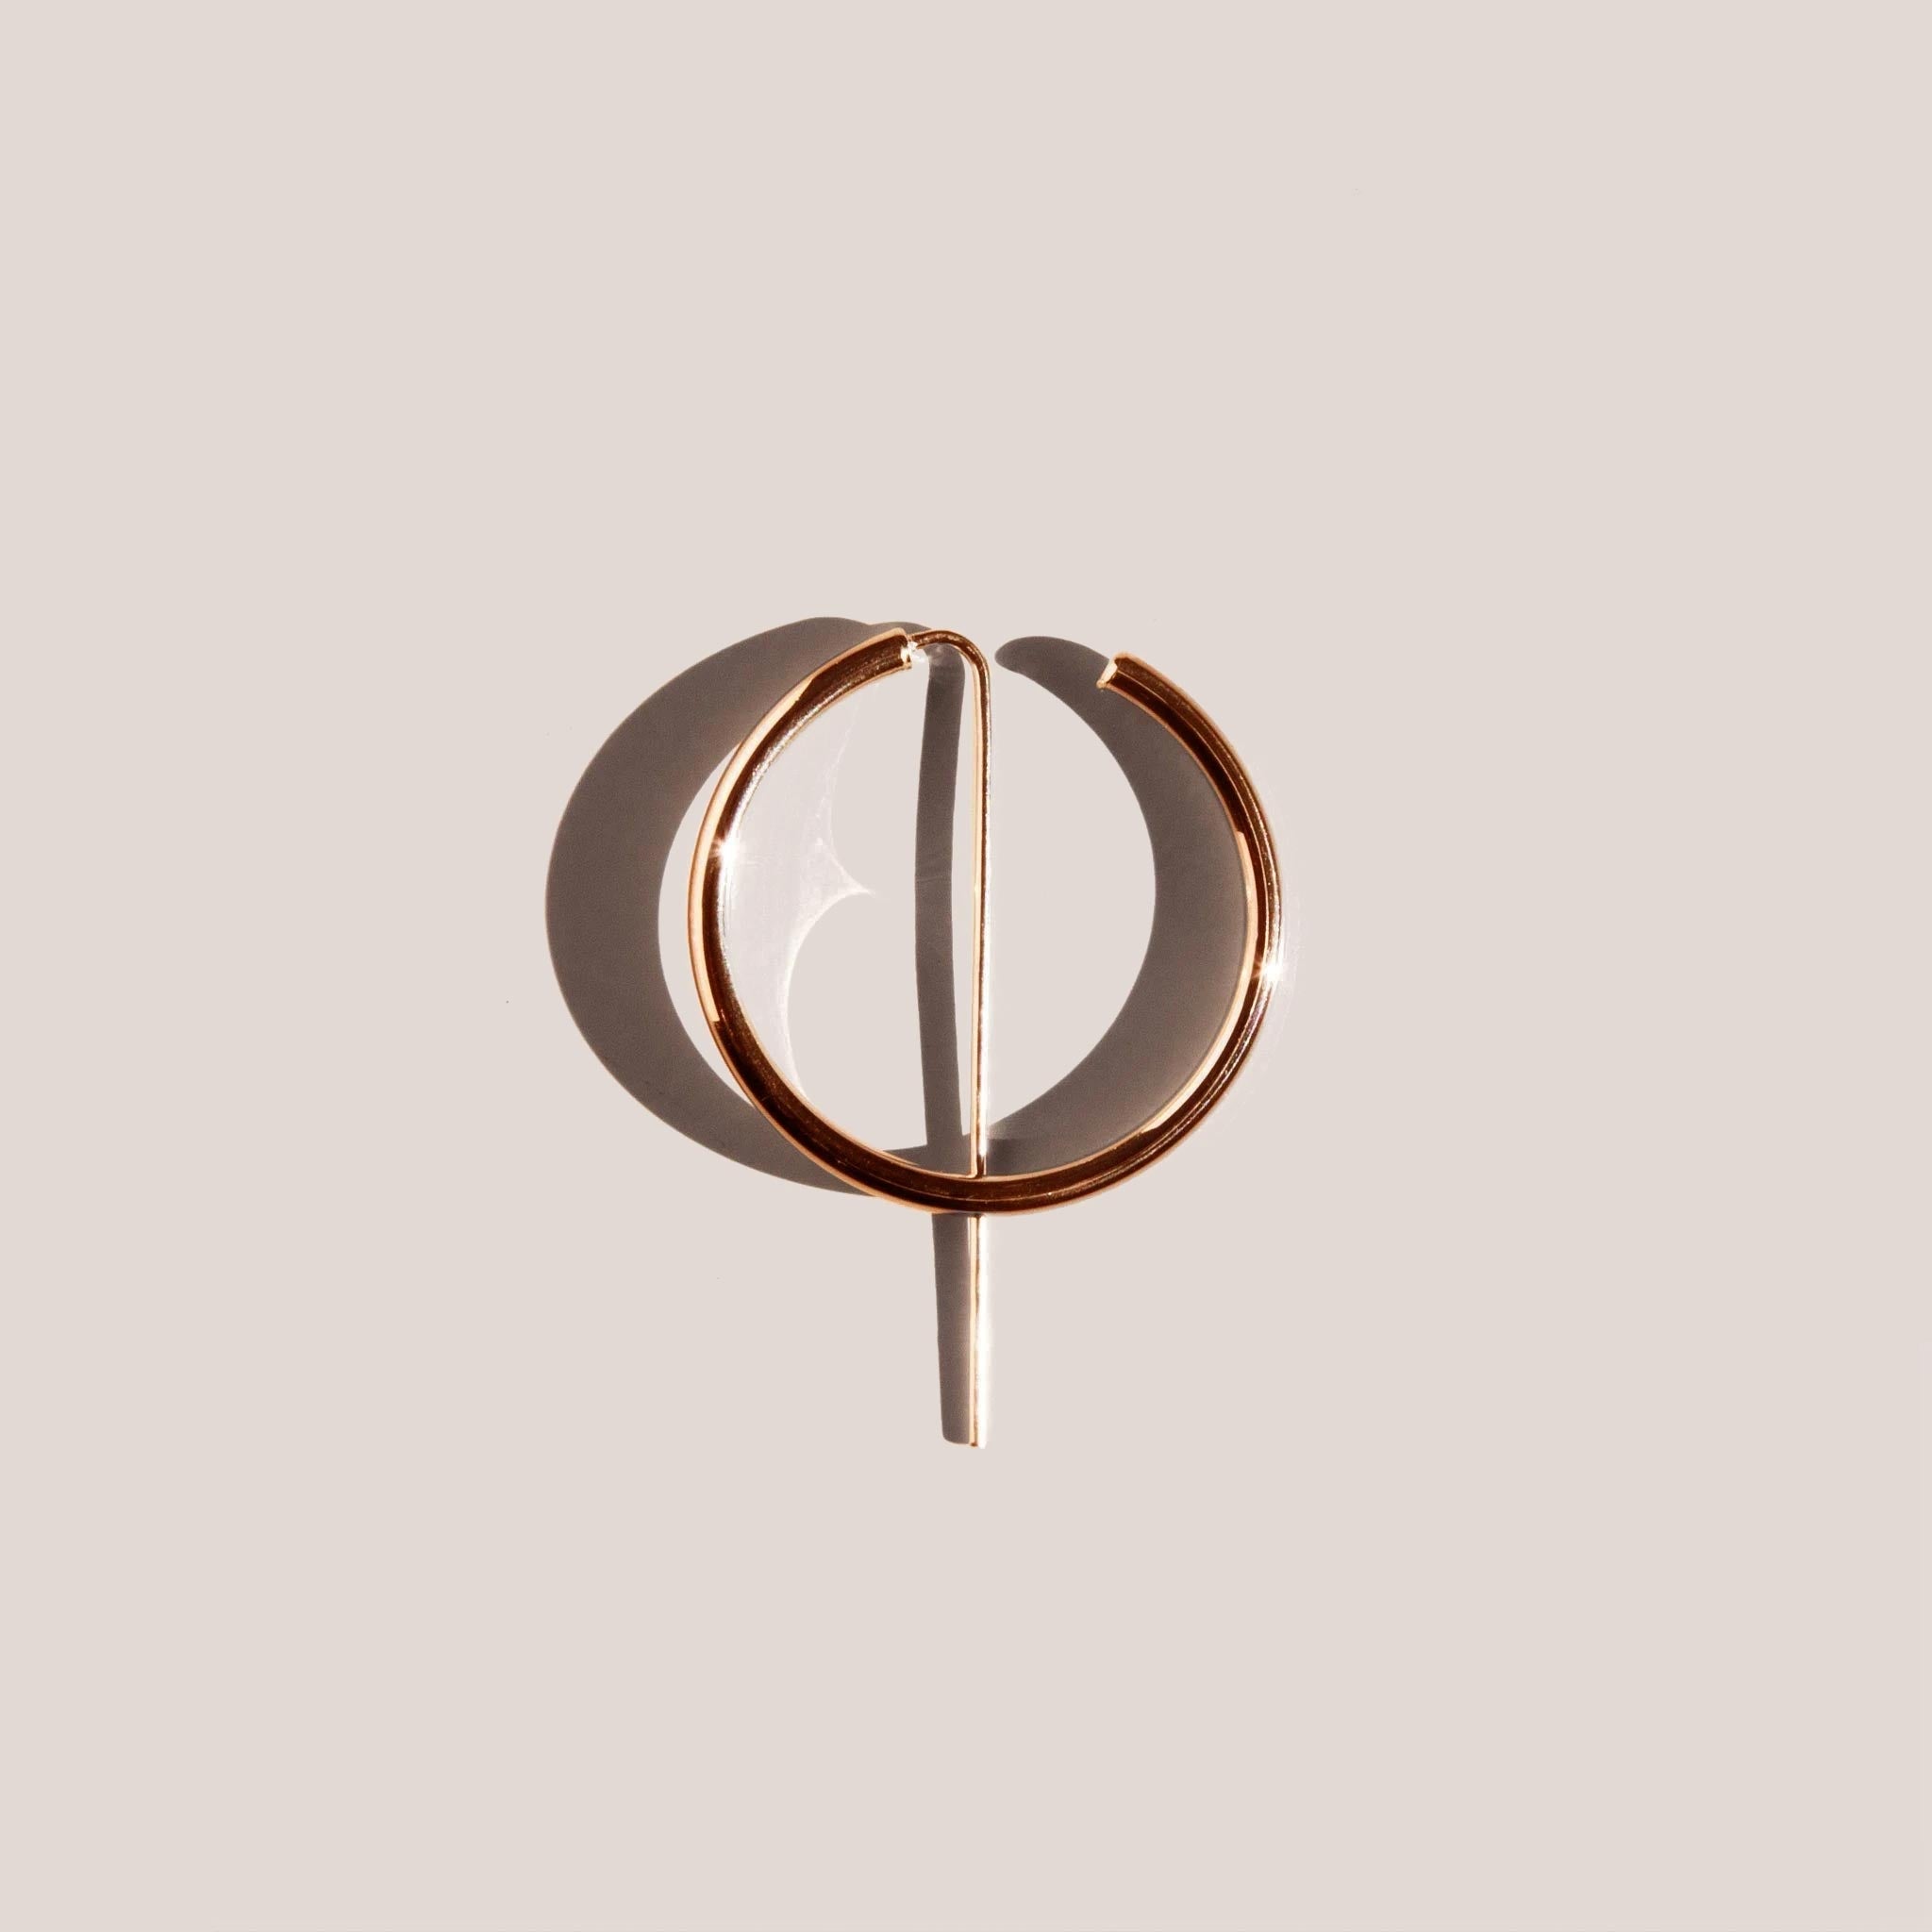 Jaclyn Moran Jewelry - Hoop & Post Earrings in Rose Gold, available at LCD.